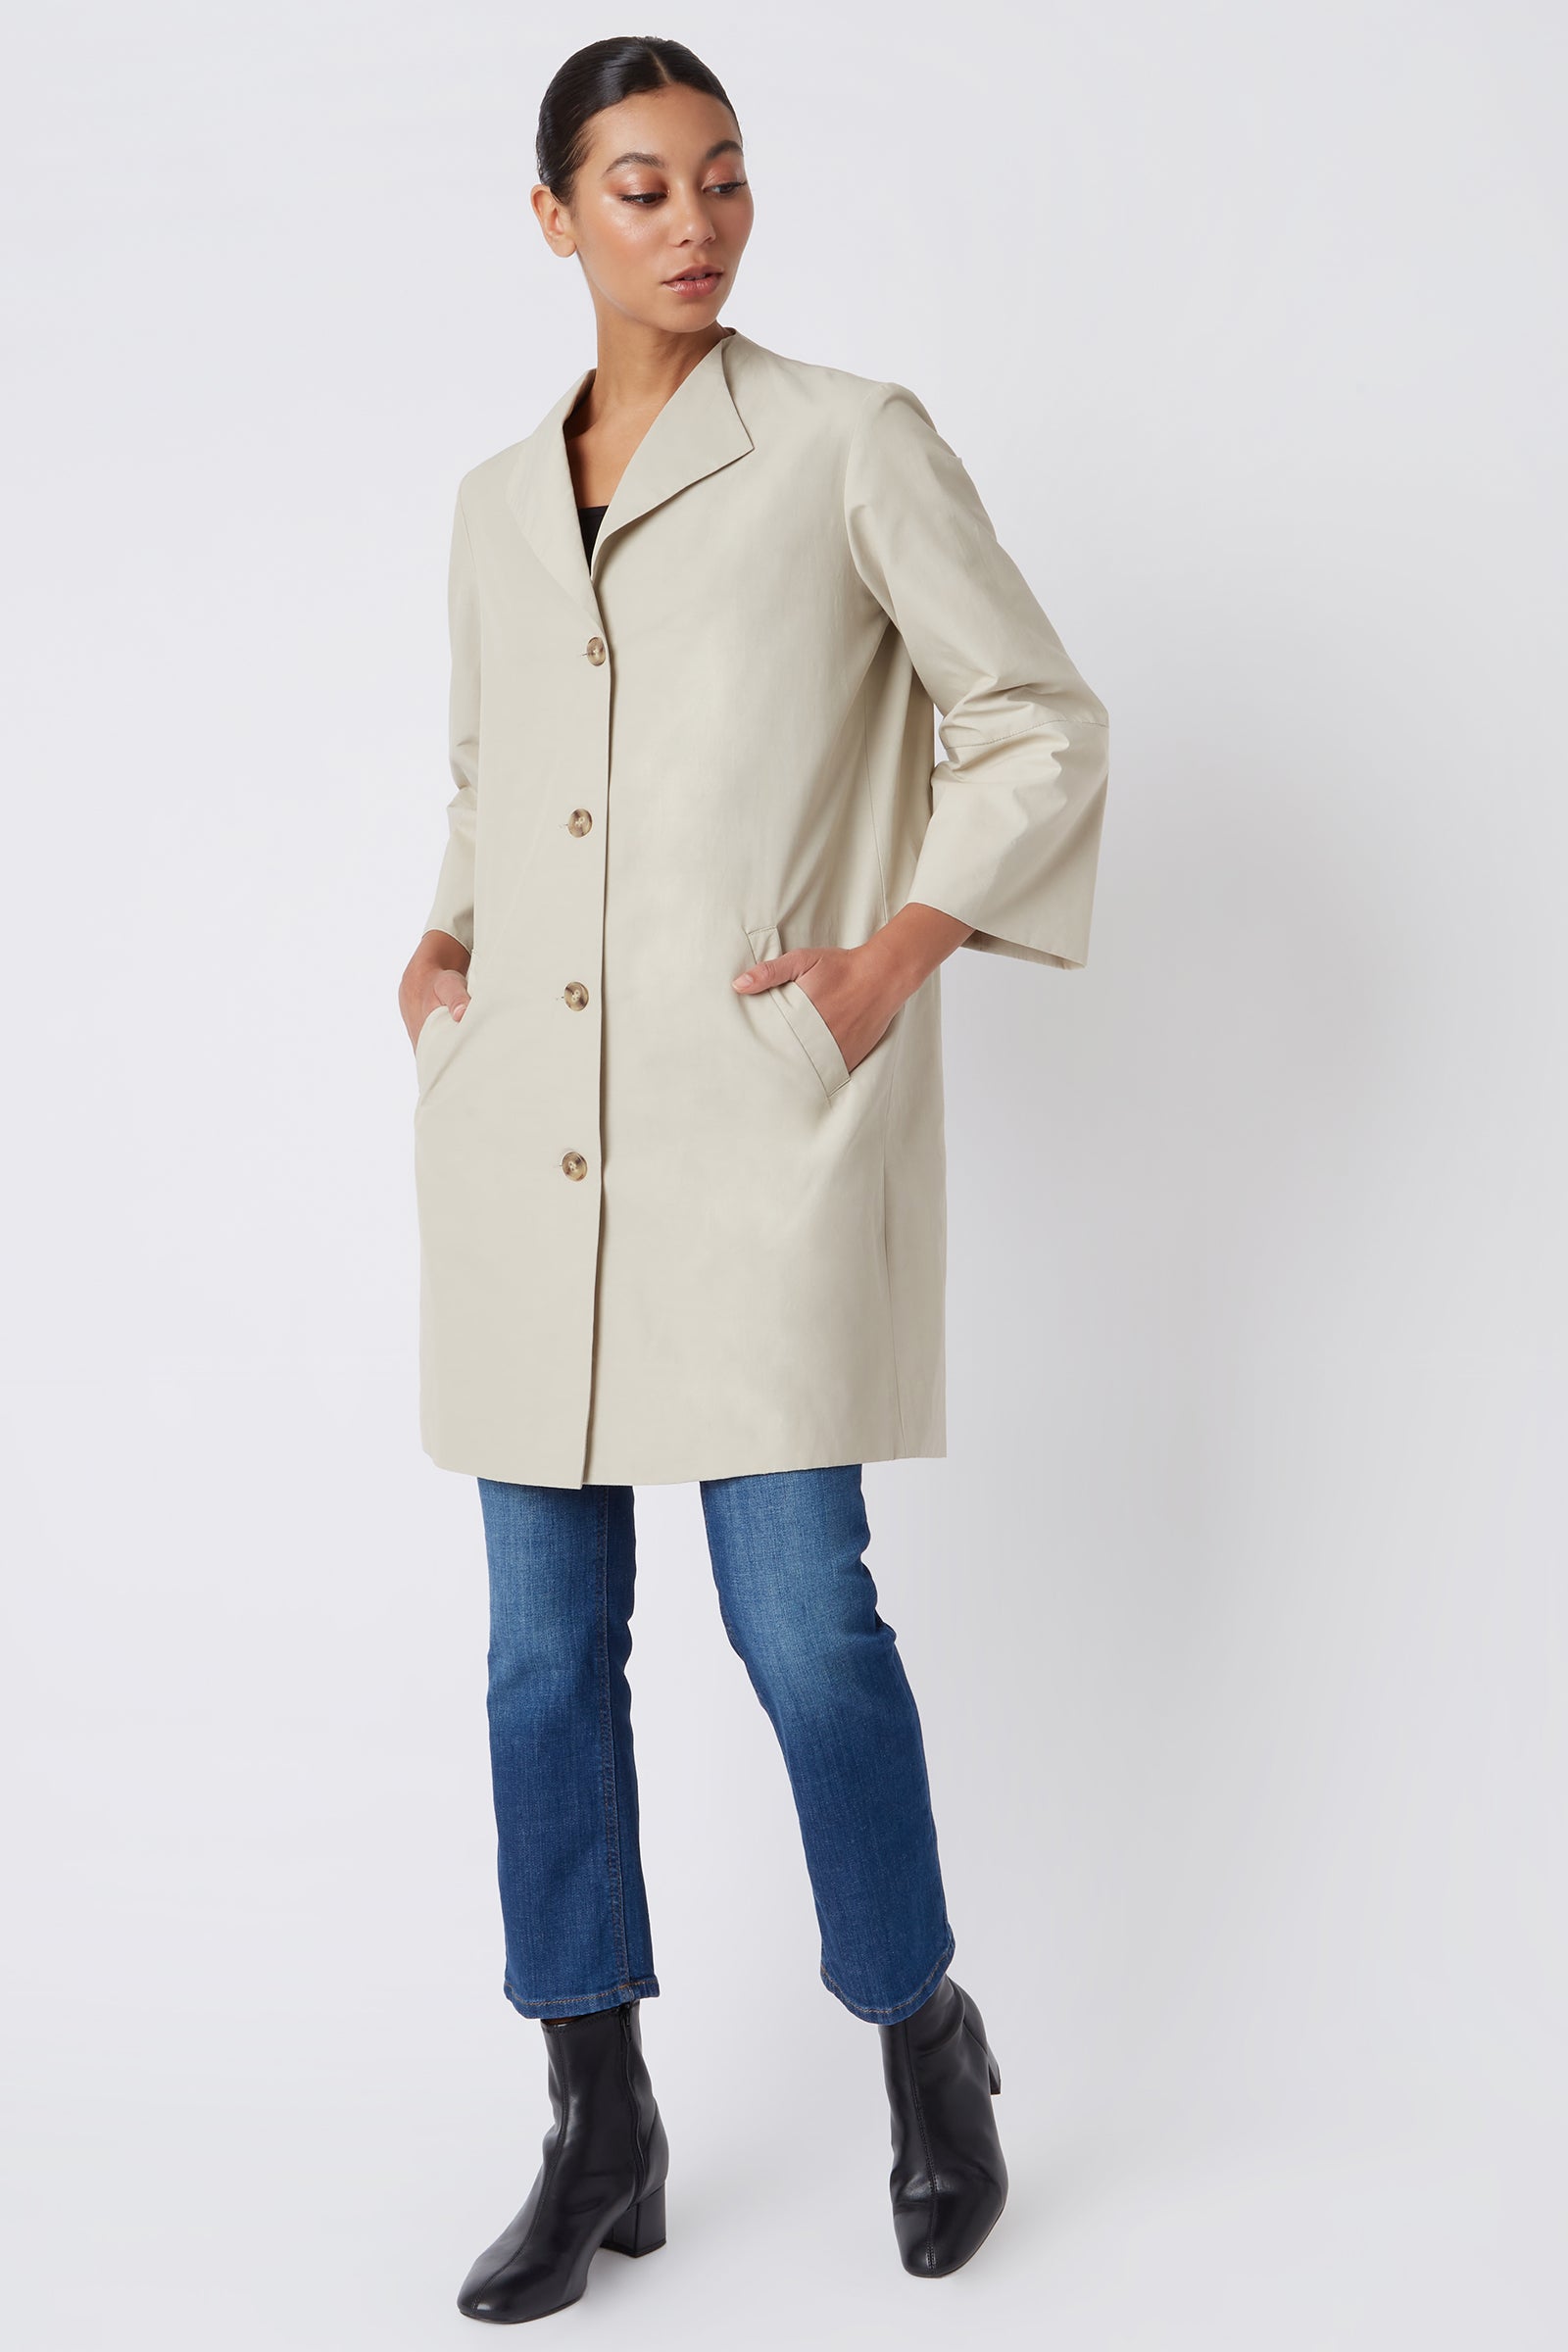 Kal Rieman Else Peacoat in Classic Khaki on Model with Hands in Pockets Full Front View